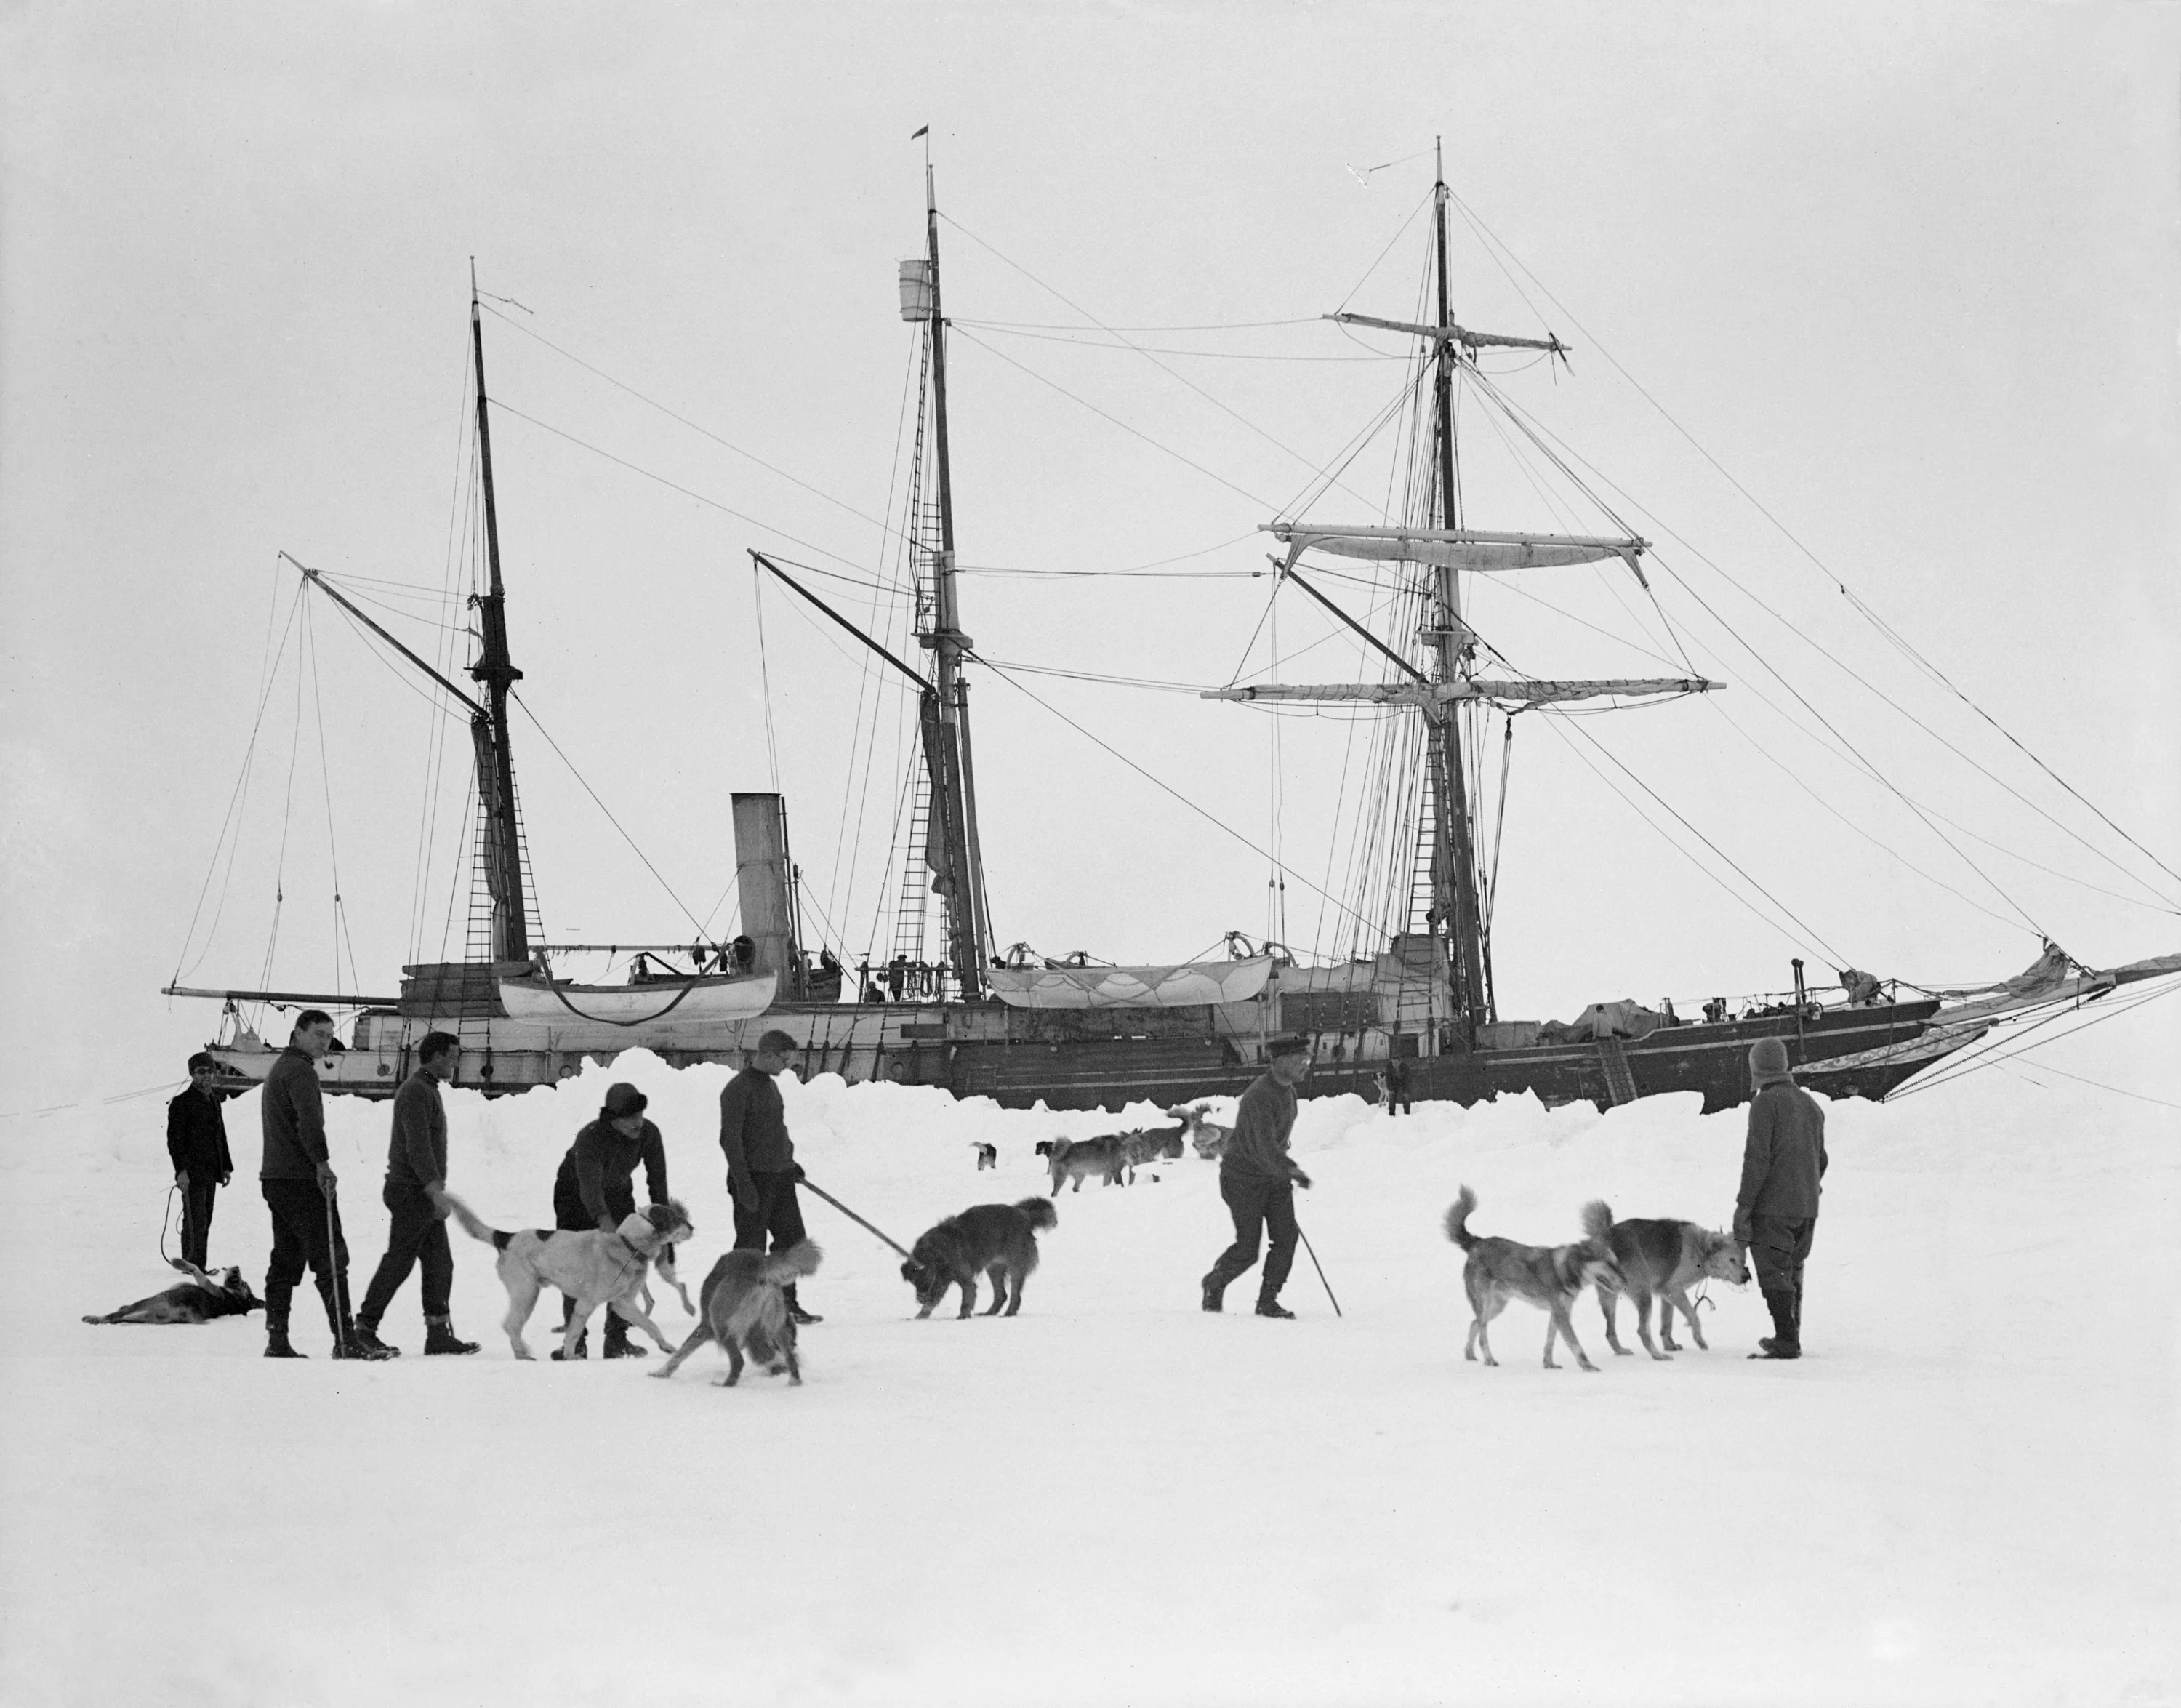 Dogs and men on ice, with Endurance behind. Photo by Frank Hurley © Royal Geographical Society (with IBG)